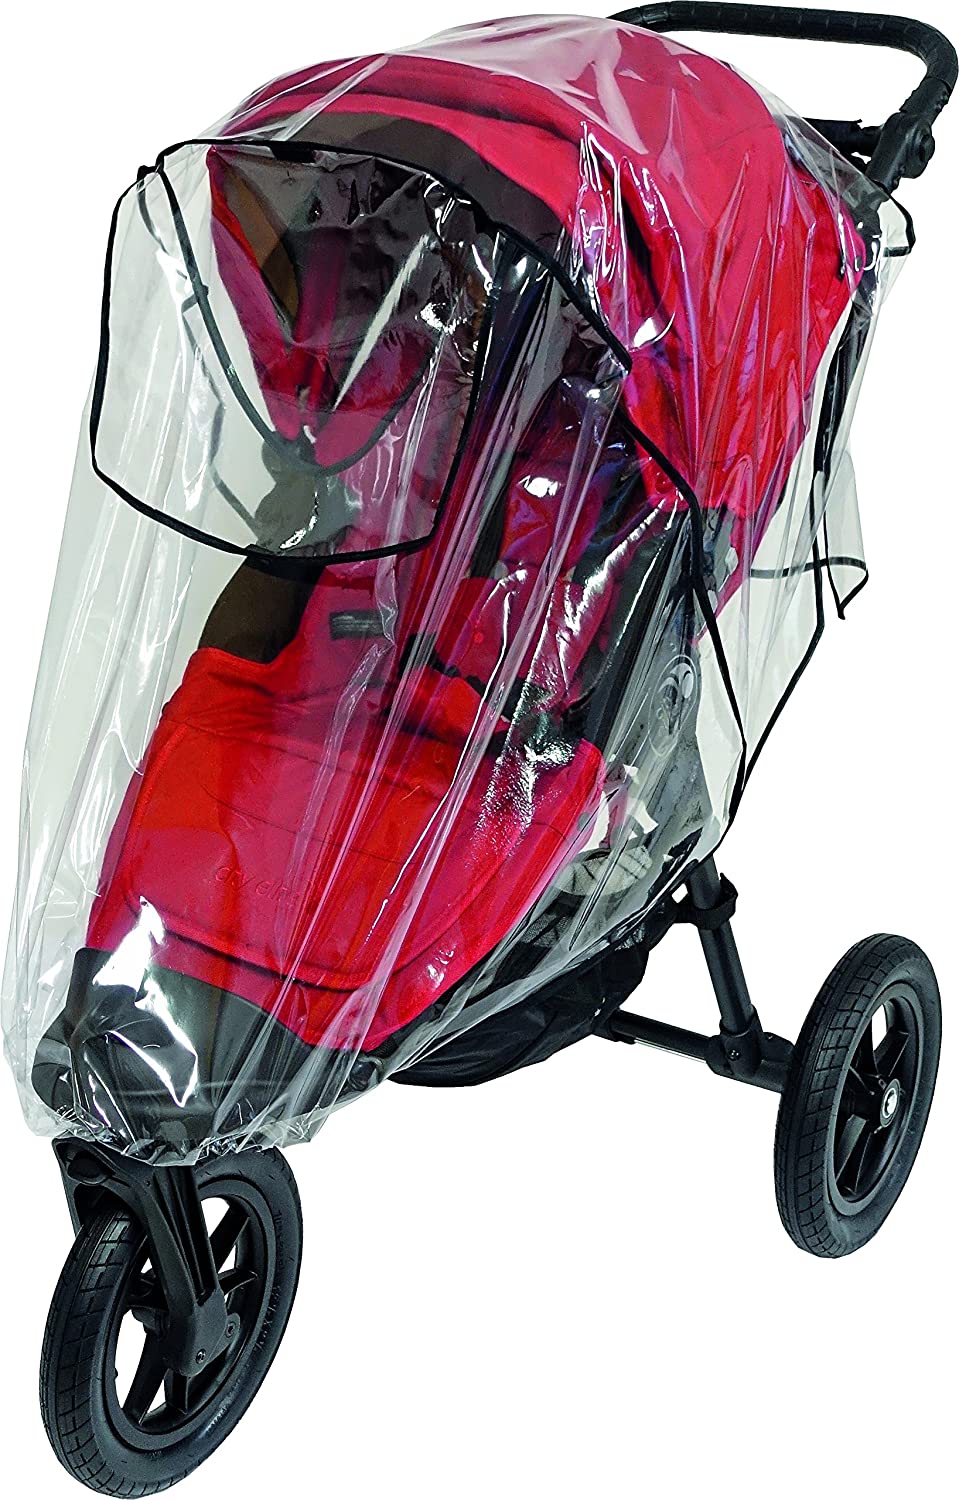 Sunnybaby 10030 Premium Raincover For Tfk Adventure Xl Jogger Such As Baby 